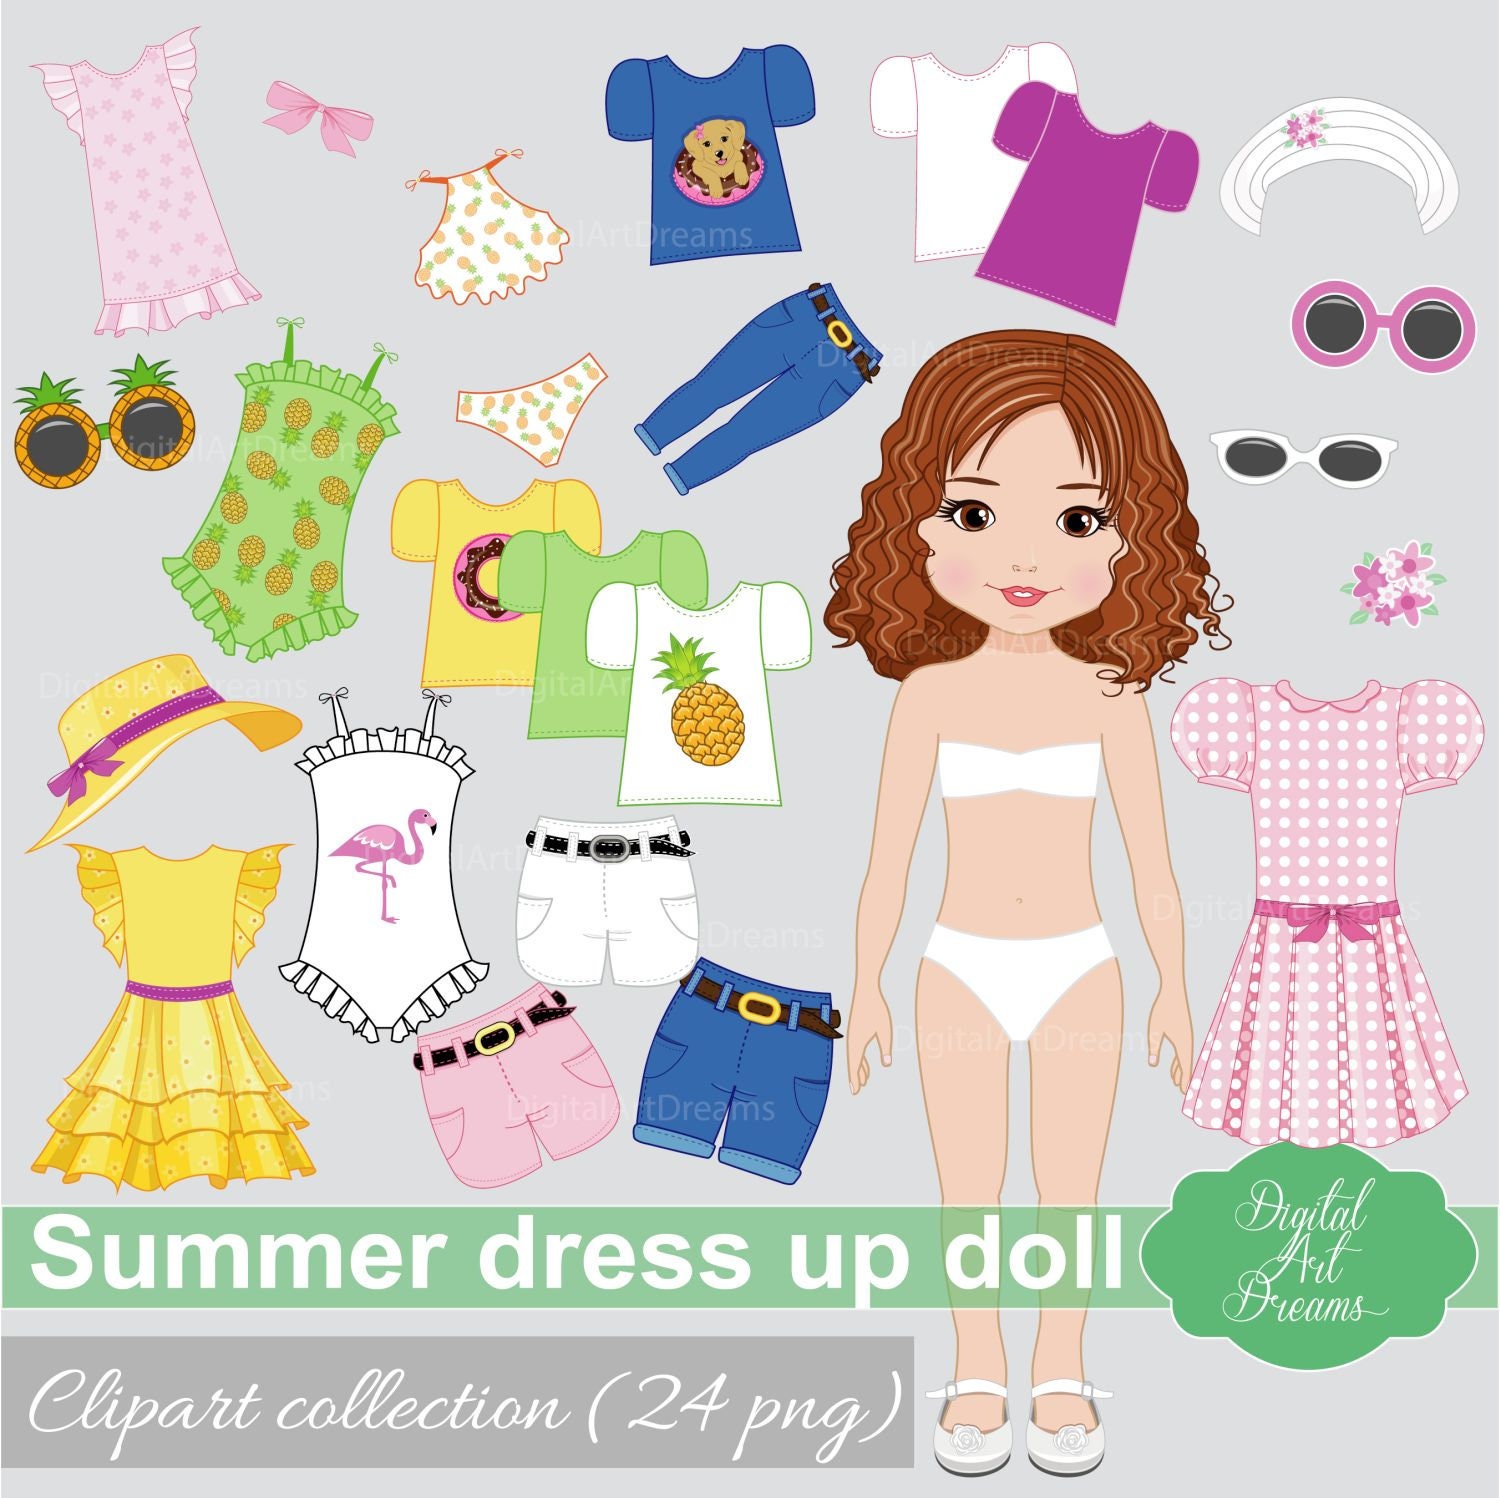 Paper Doll Printable Cut Out Clothes Fashion Girl Clipart Paper Dolls  Original Summer Dress Digital Drawing Clip Art Image Png 